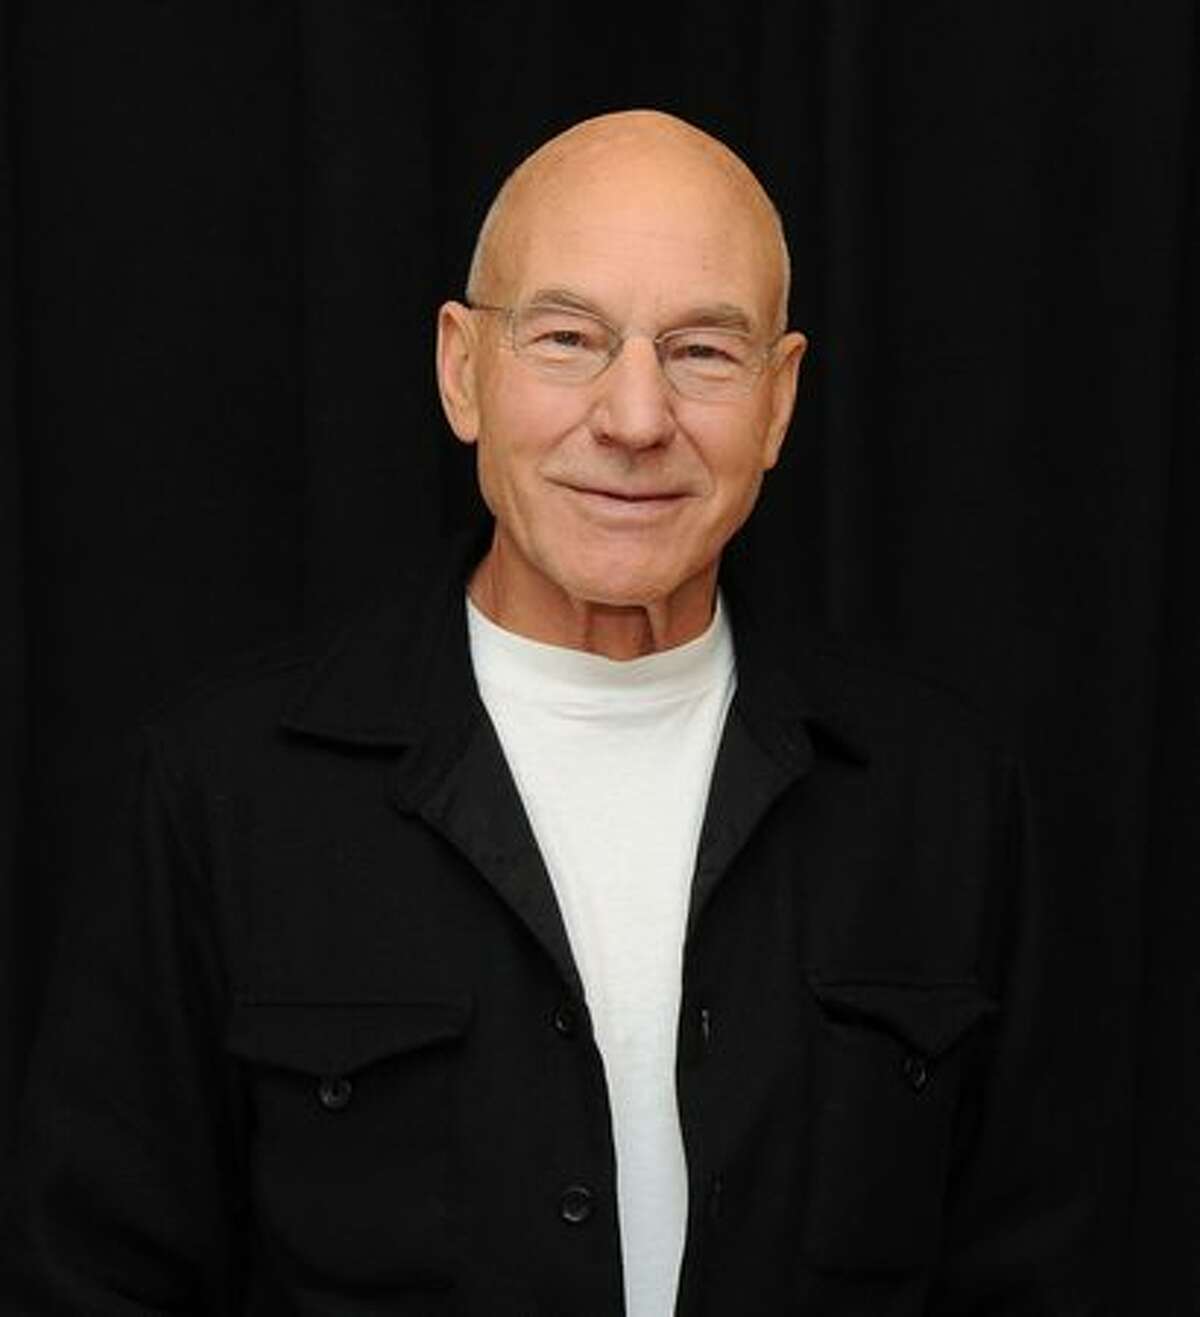 Actor Patrick Stewart attends "A Life in the Theatre" cast photo call at the Atlantic Theater Company in New York City.